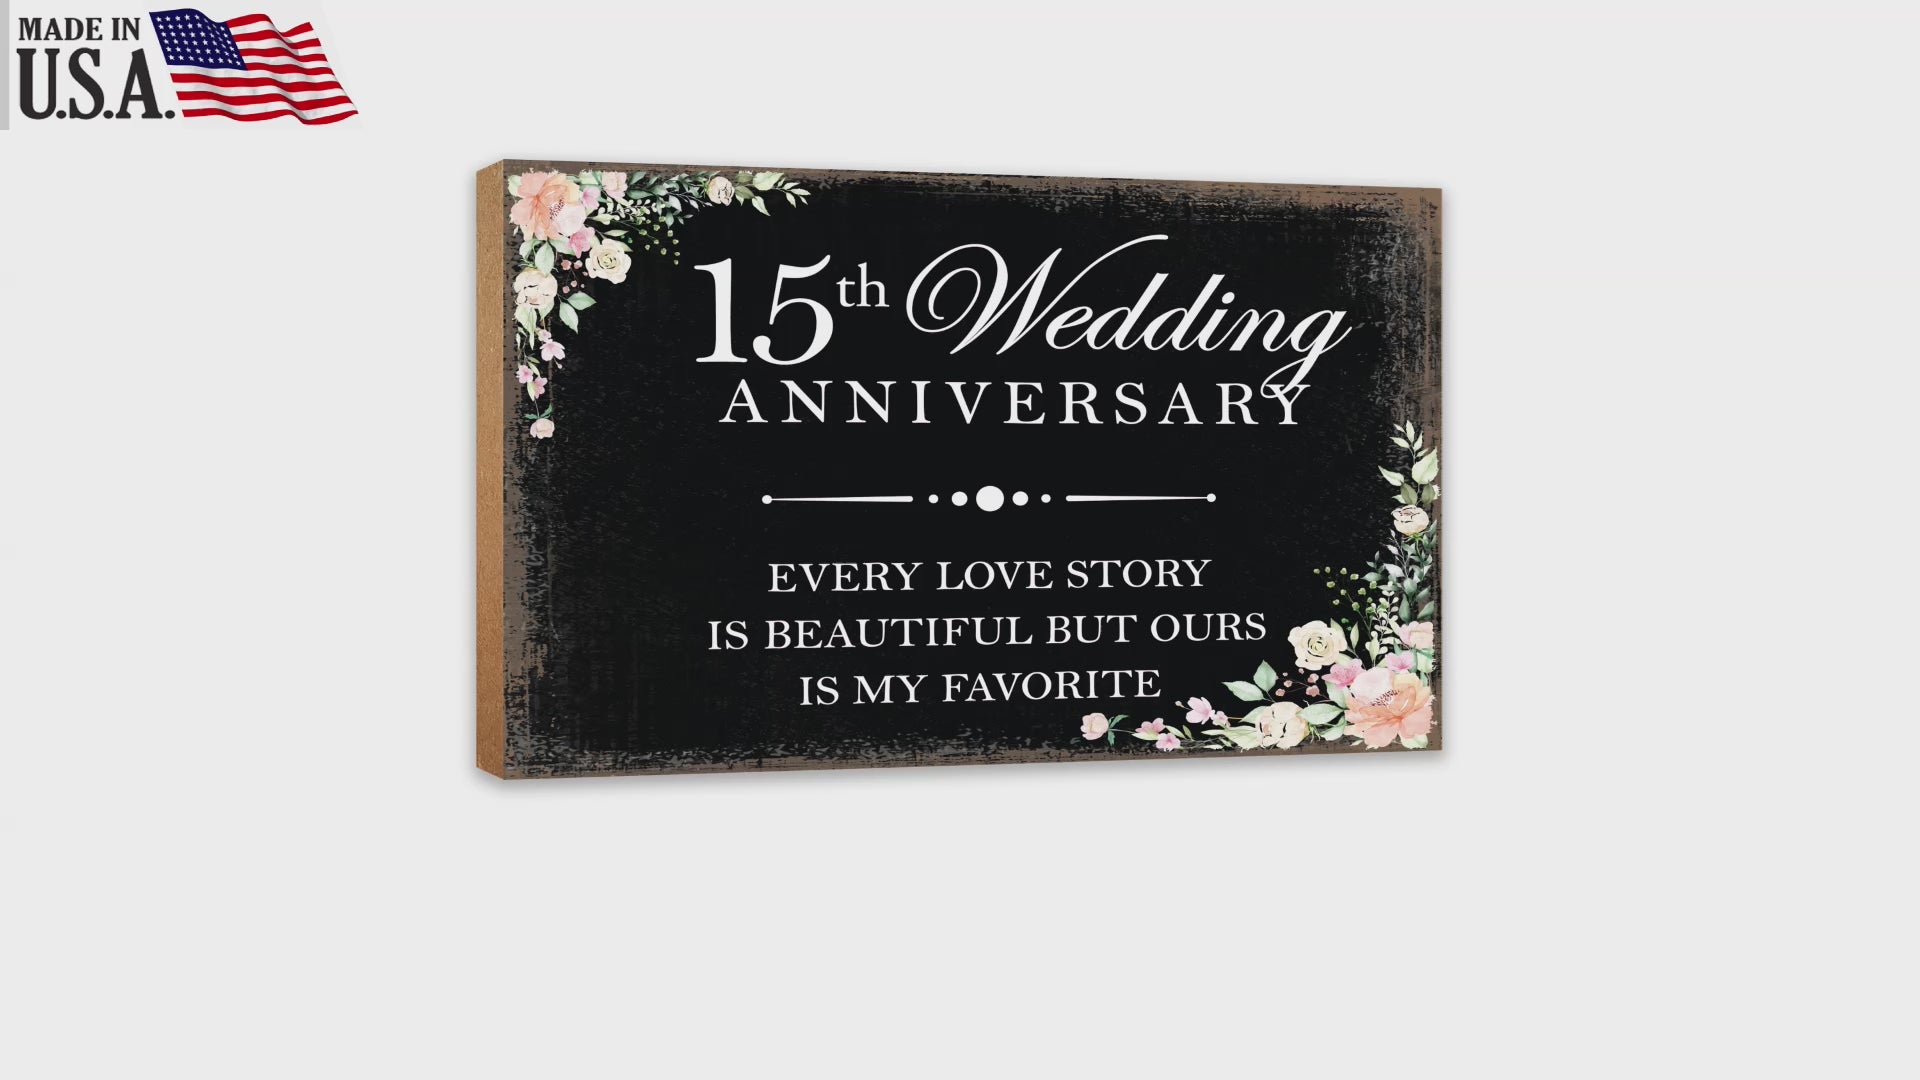 15th Wedding Anniversary Unique Shelf Decor and Tabletop Signs Gift for Couples - Every Love Story